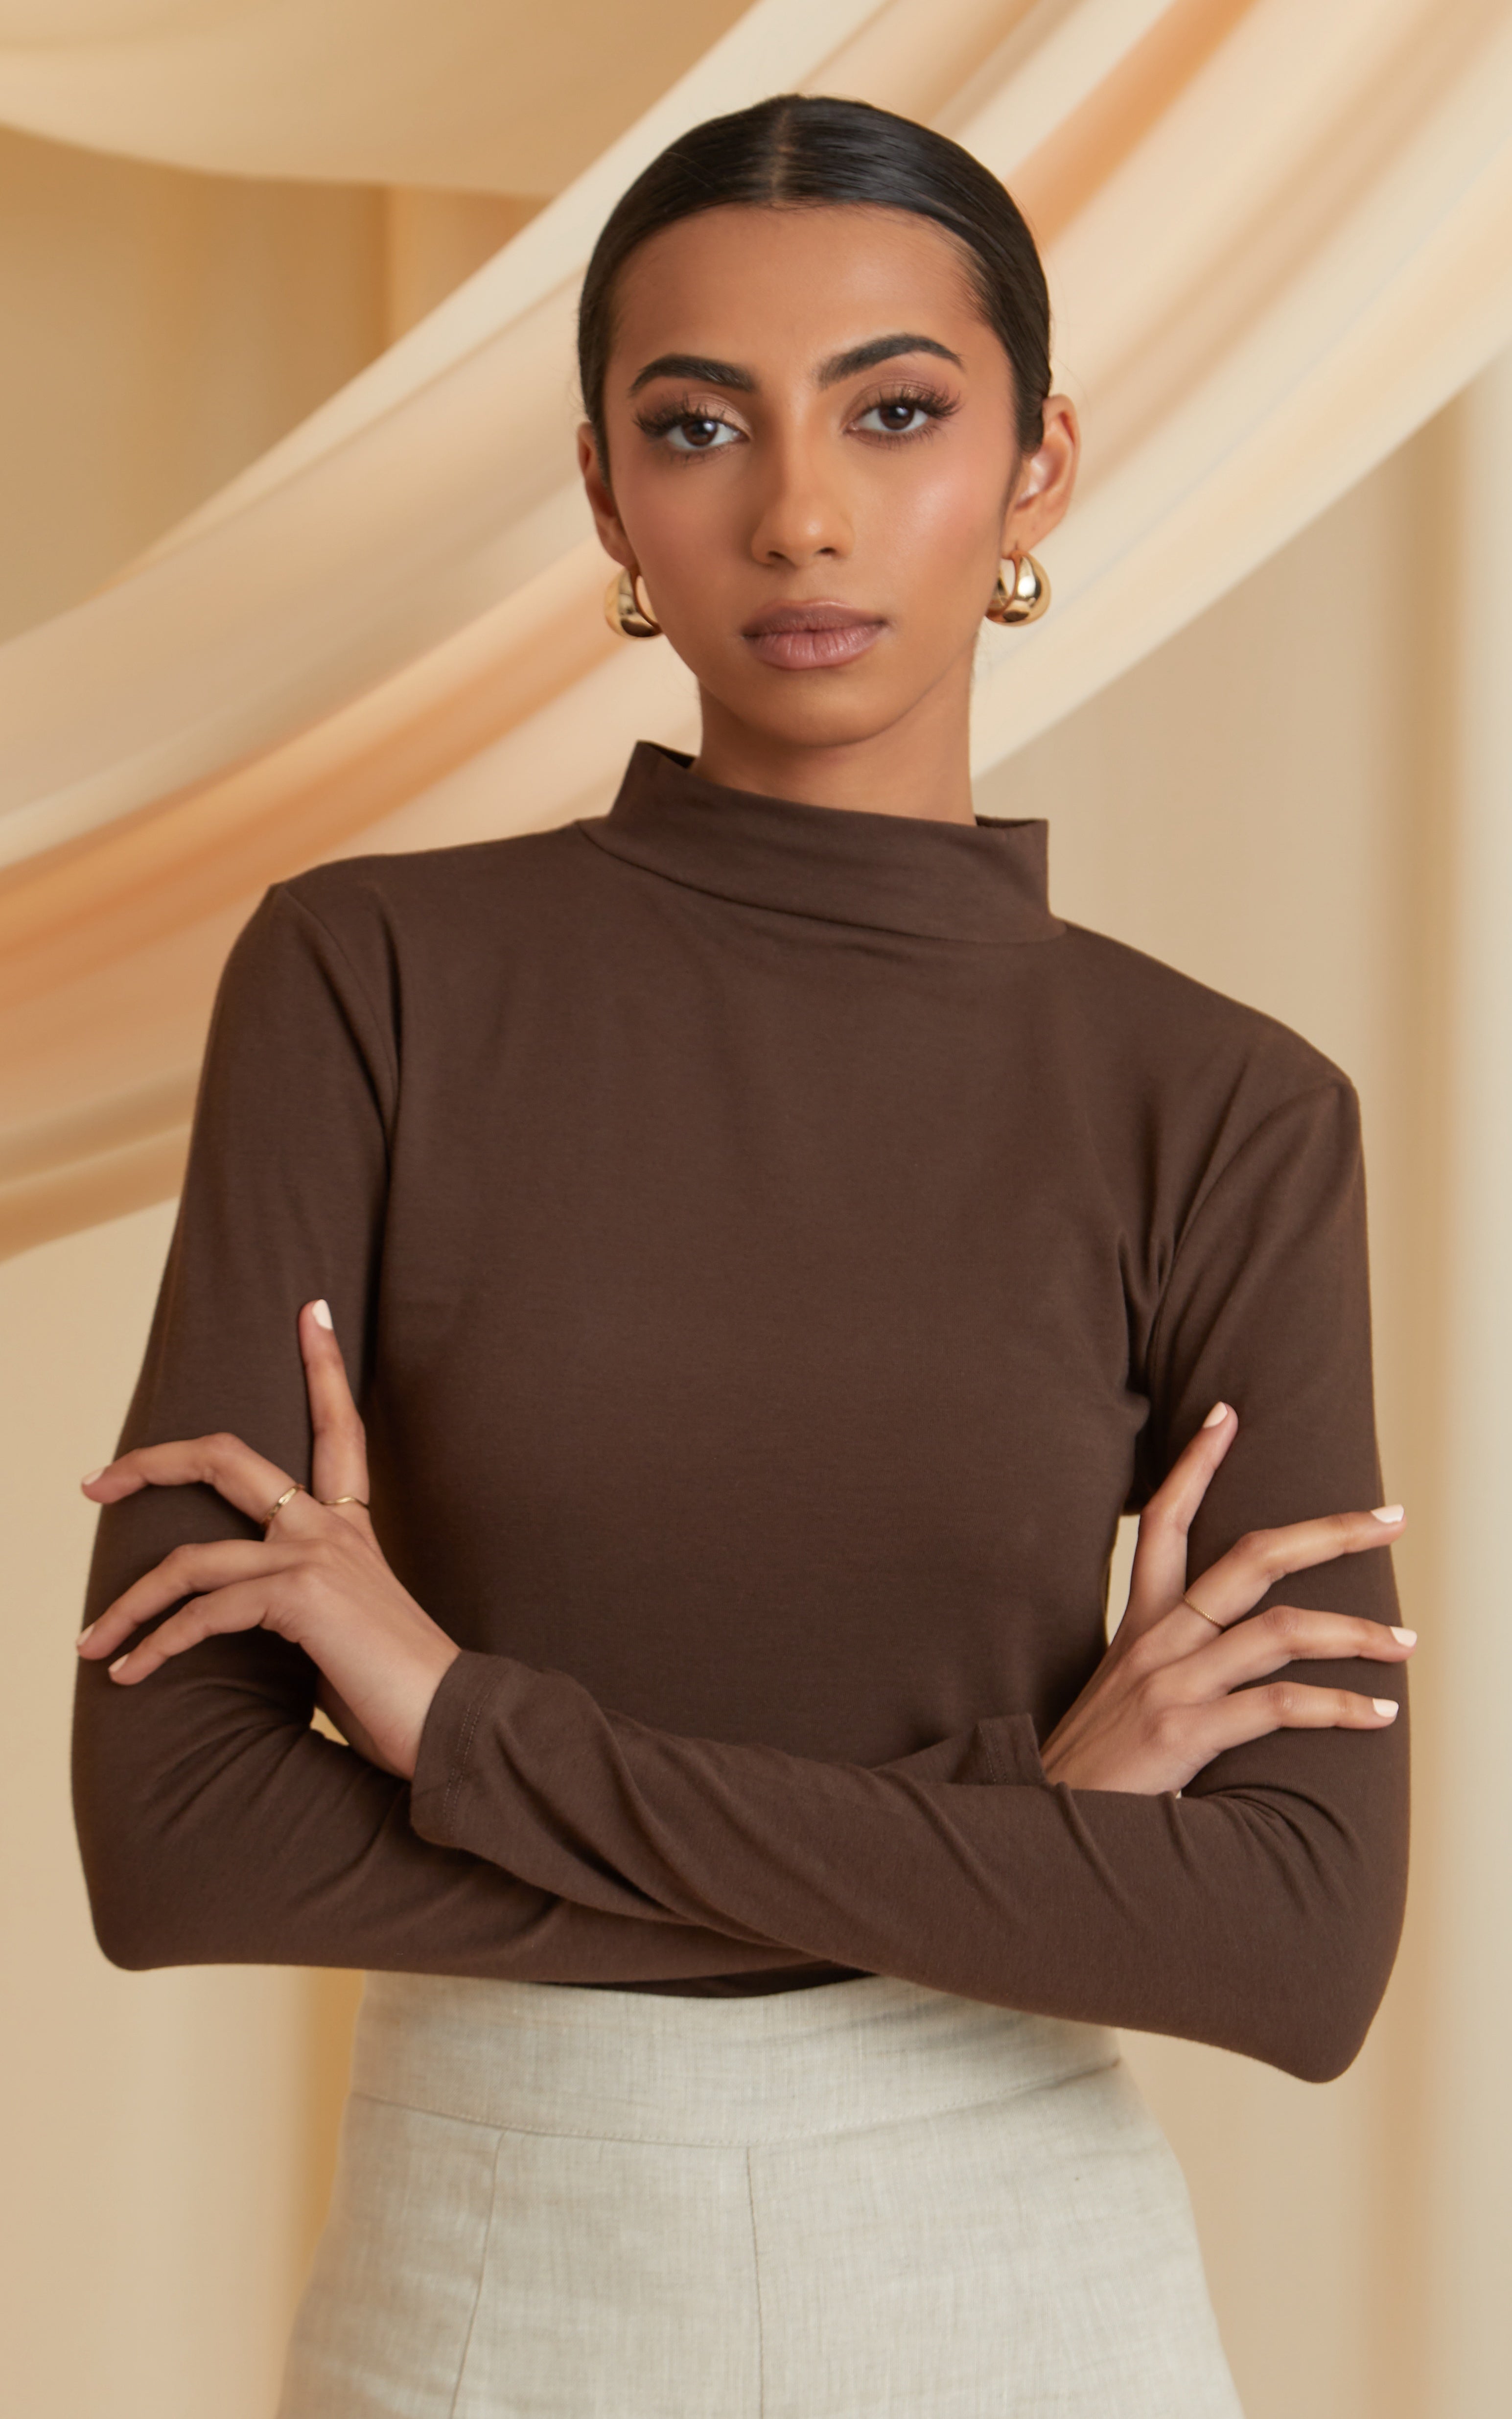 Women's Long-Sleeve Seamless Fabric Square-Neck Top, Women's Clearance